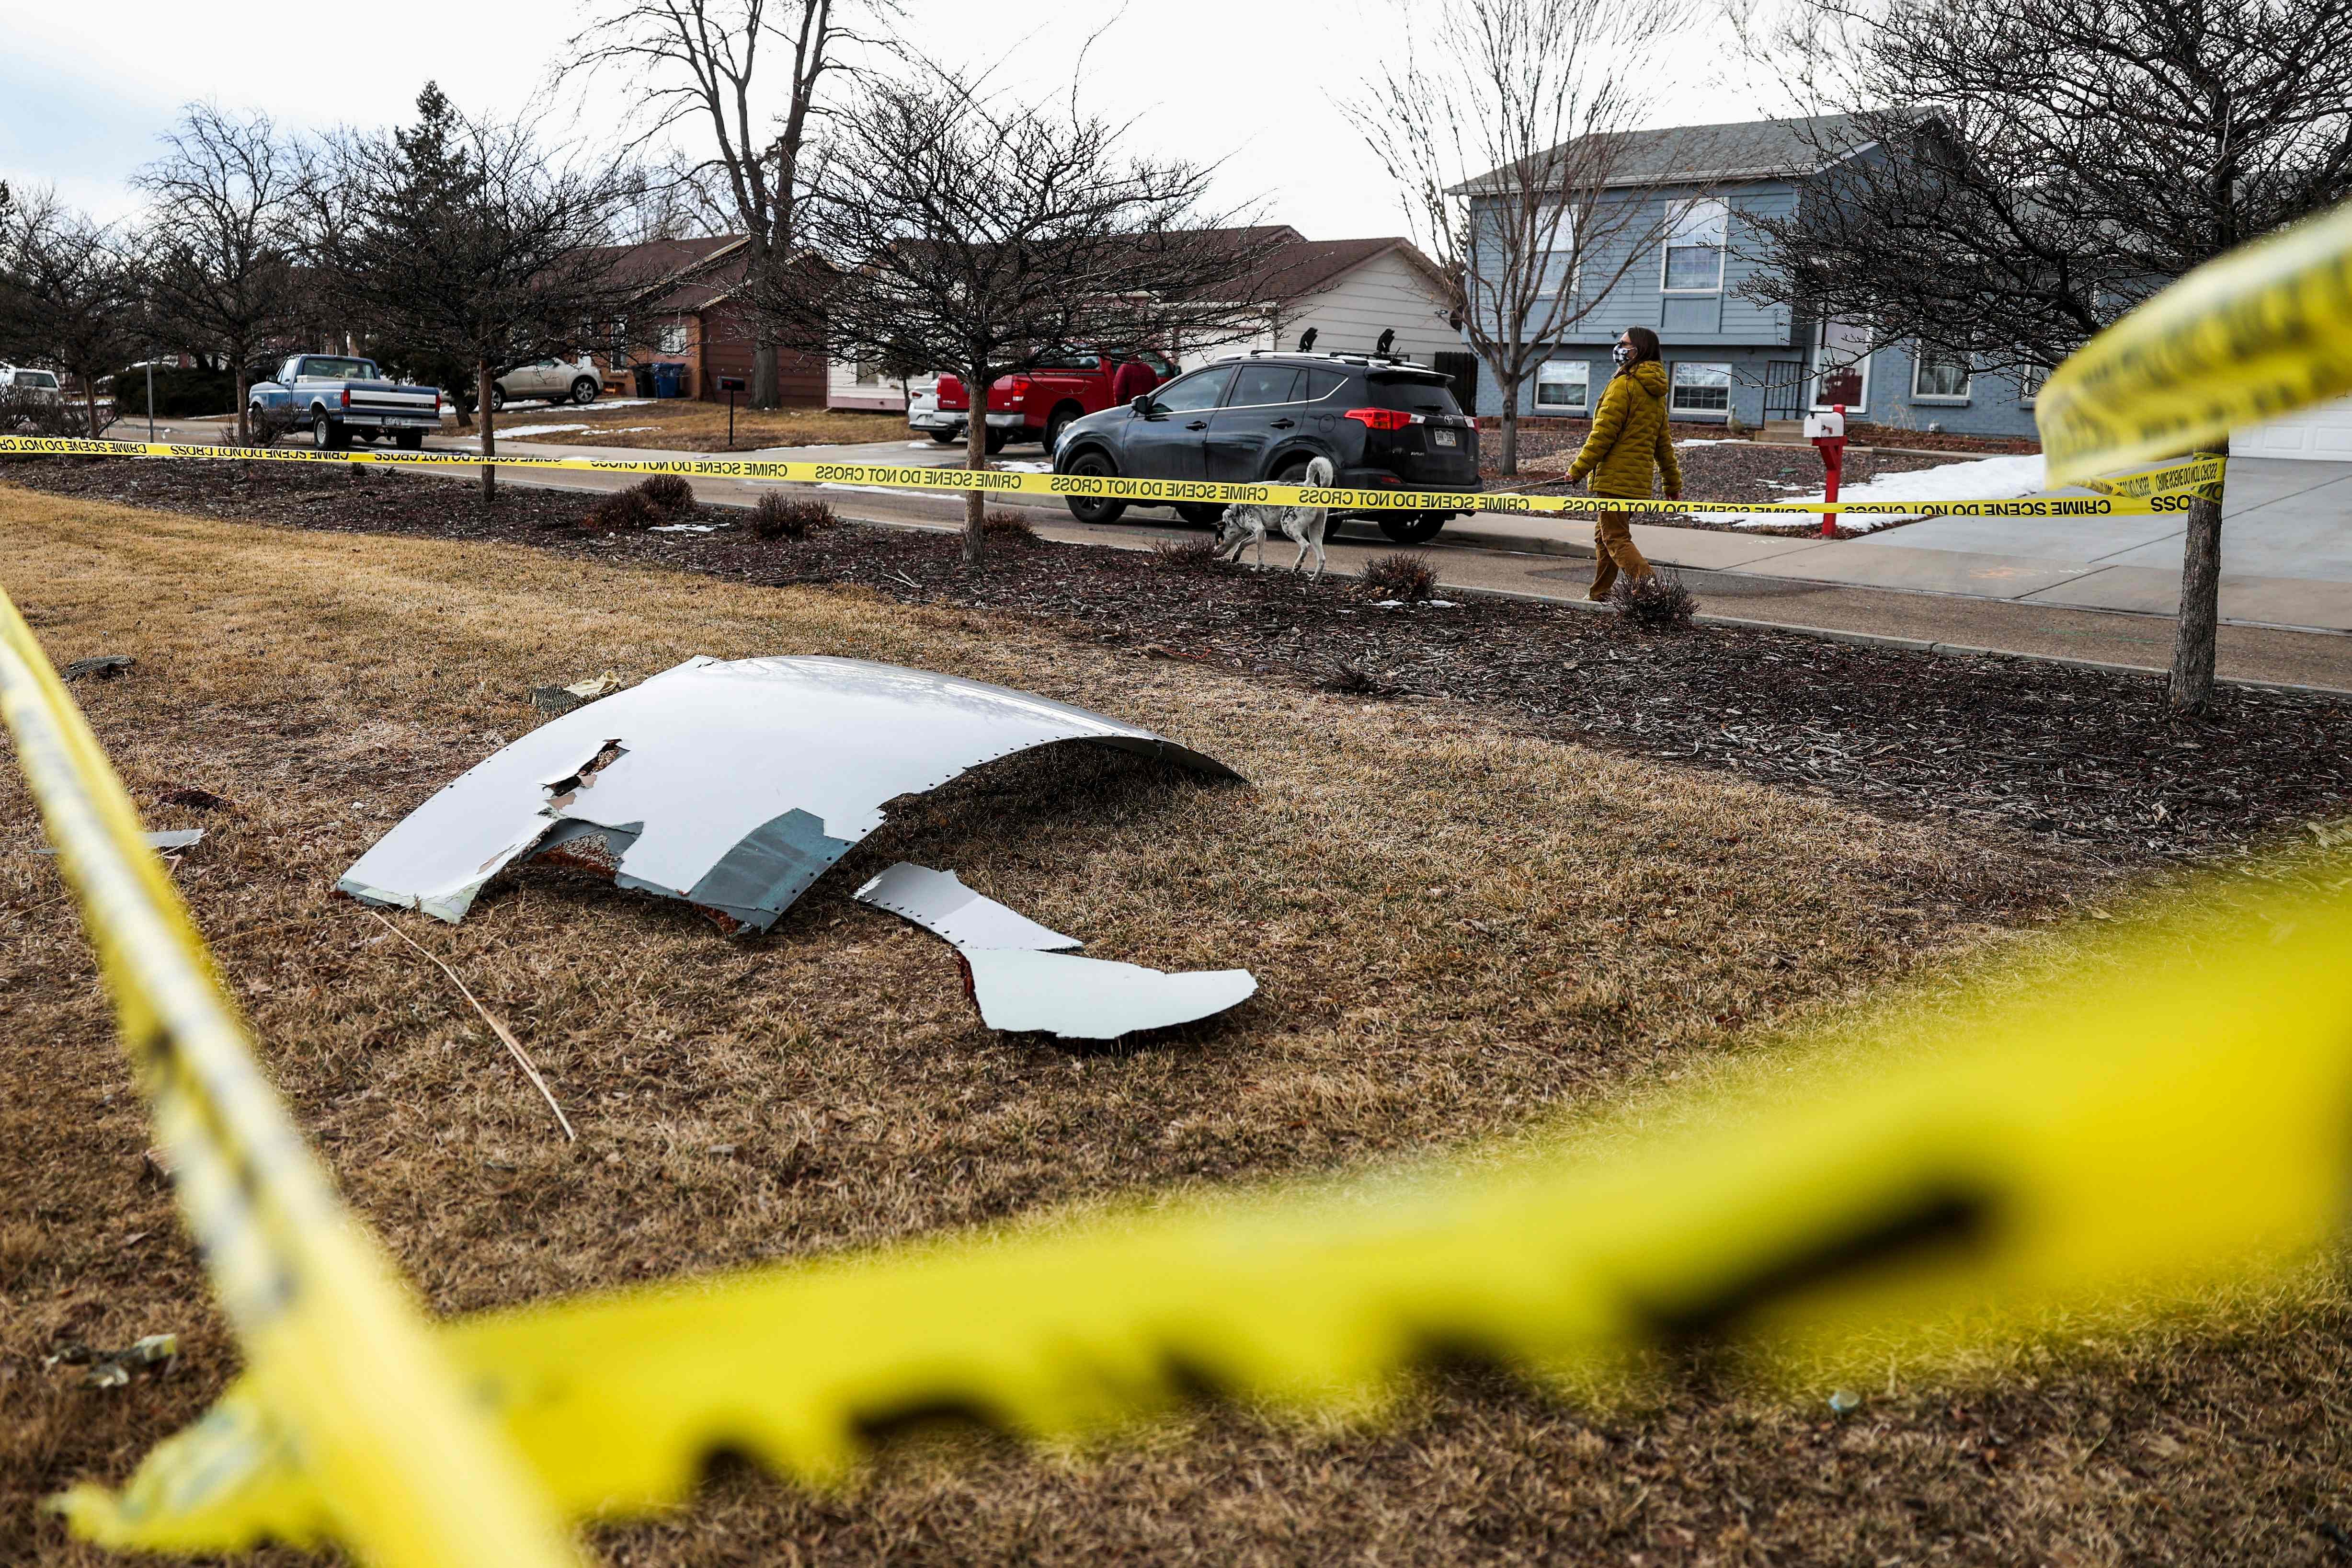 An airplane engine from Flight 328 sit scattered in a neighborhood. Credit: AFP Photo